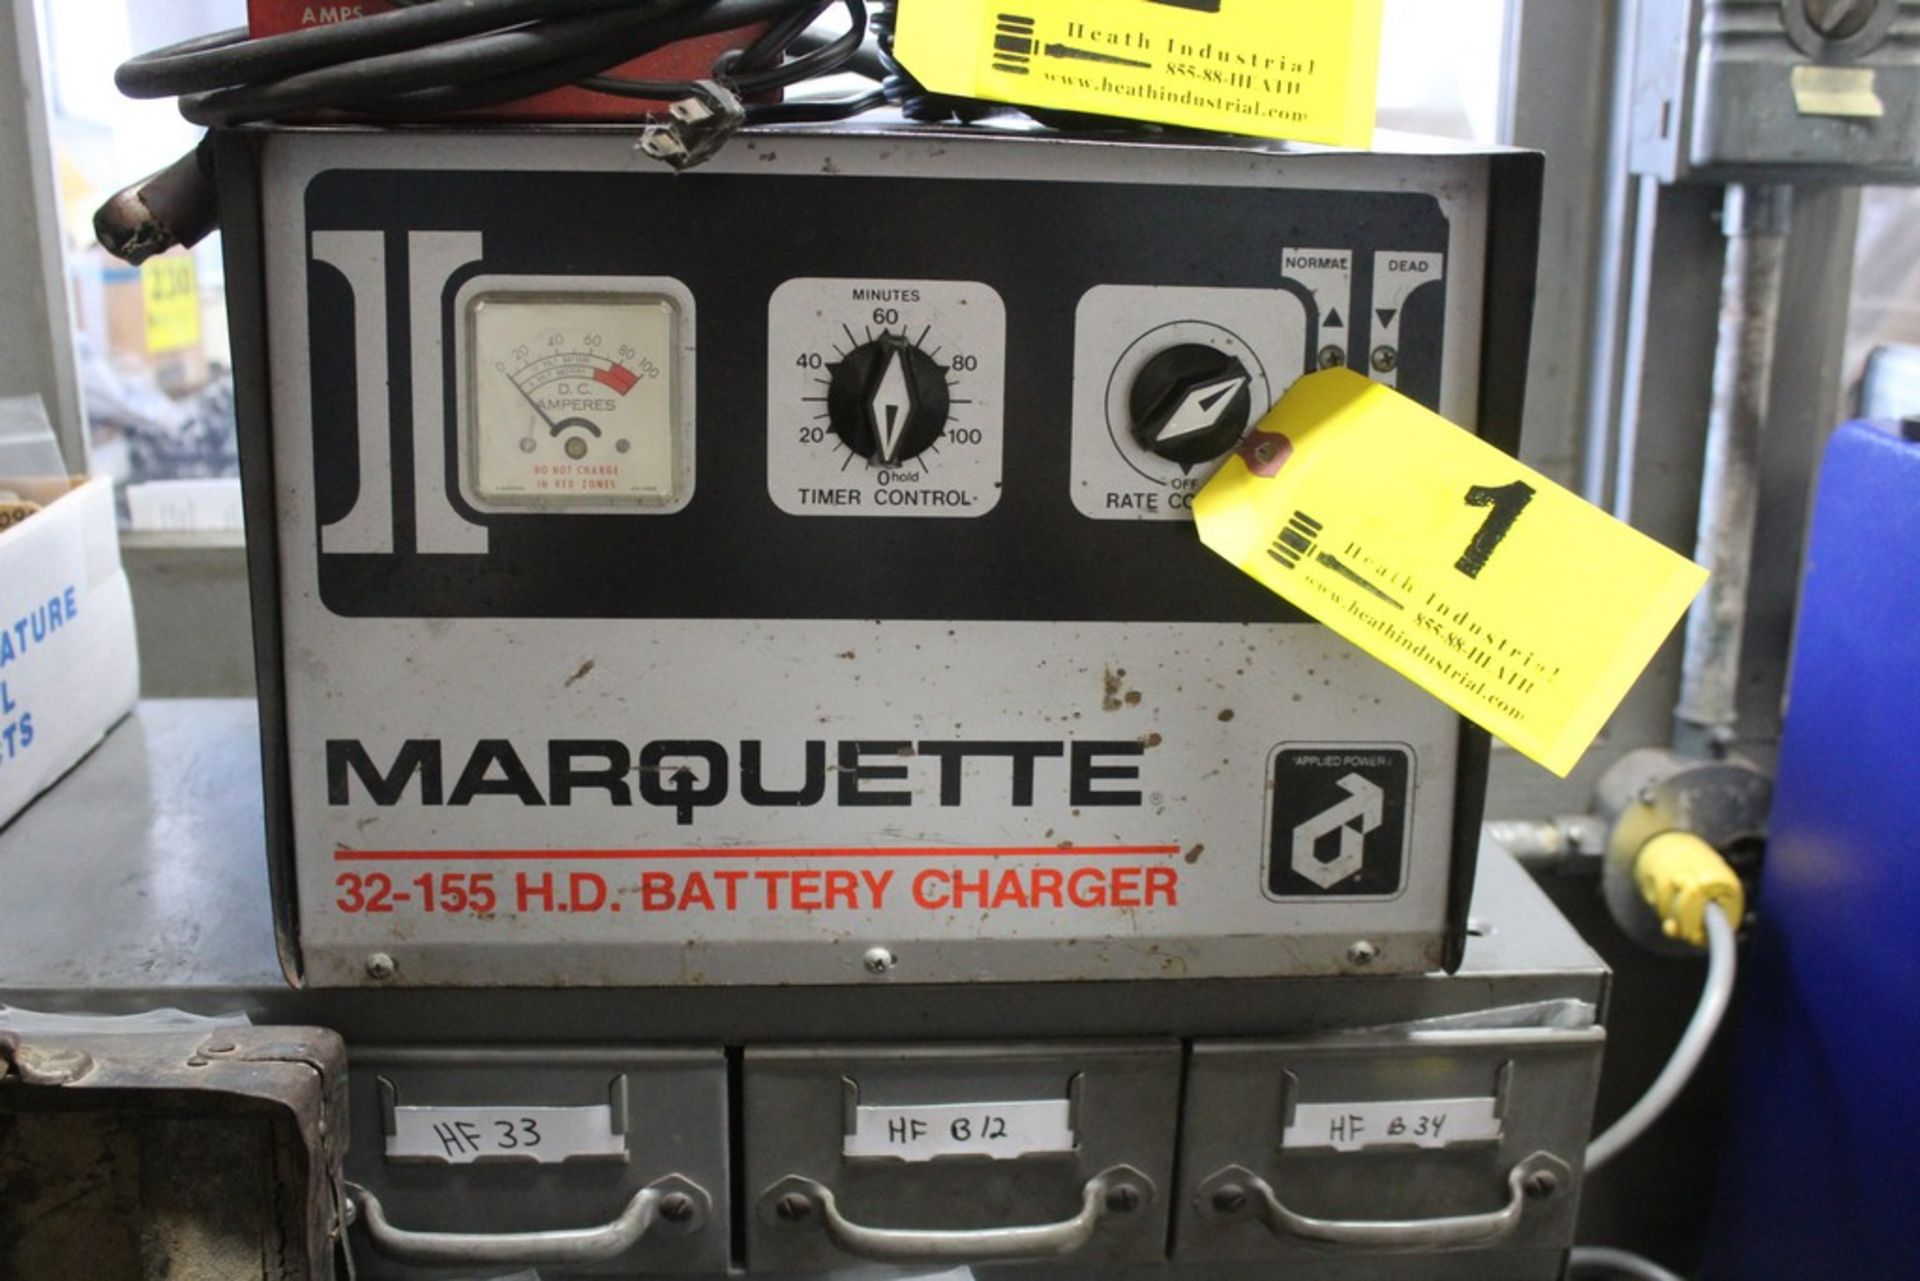 MARQUETTE 32-155 HD BATTERY CHARGER